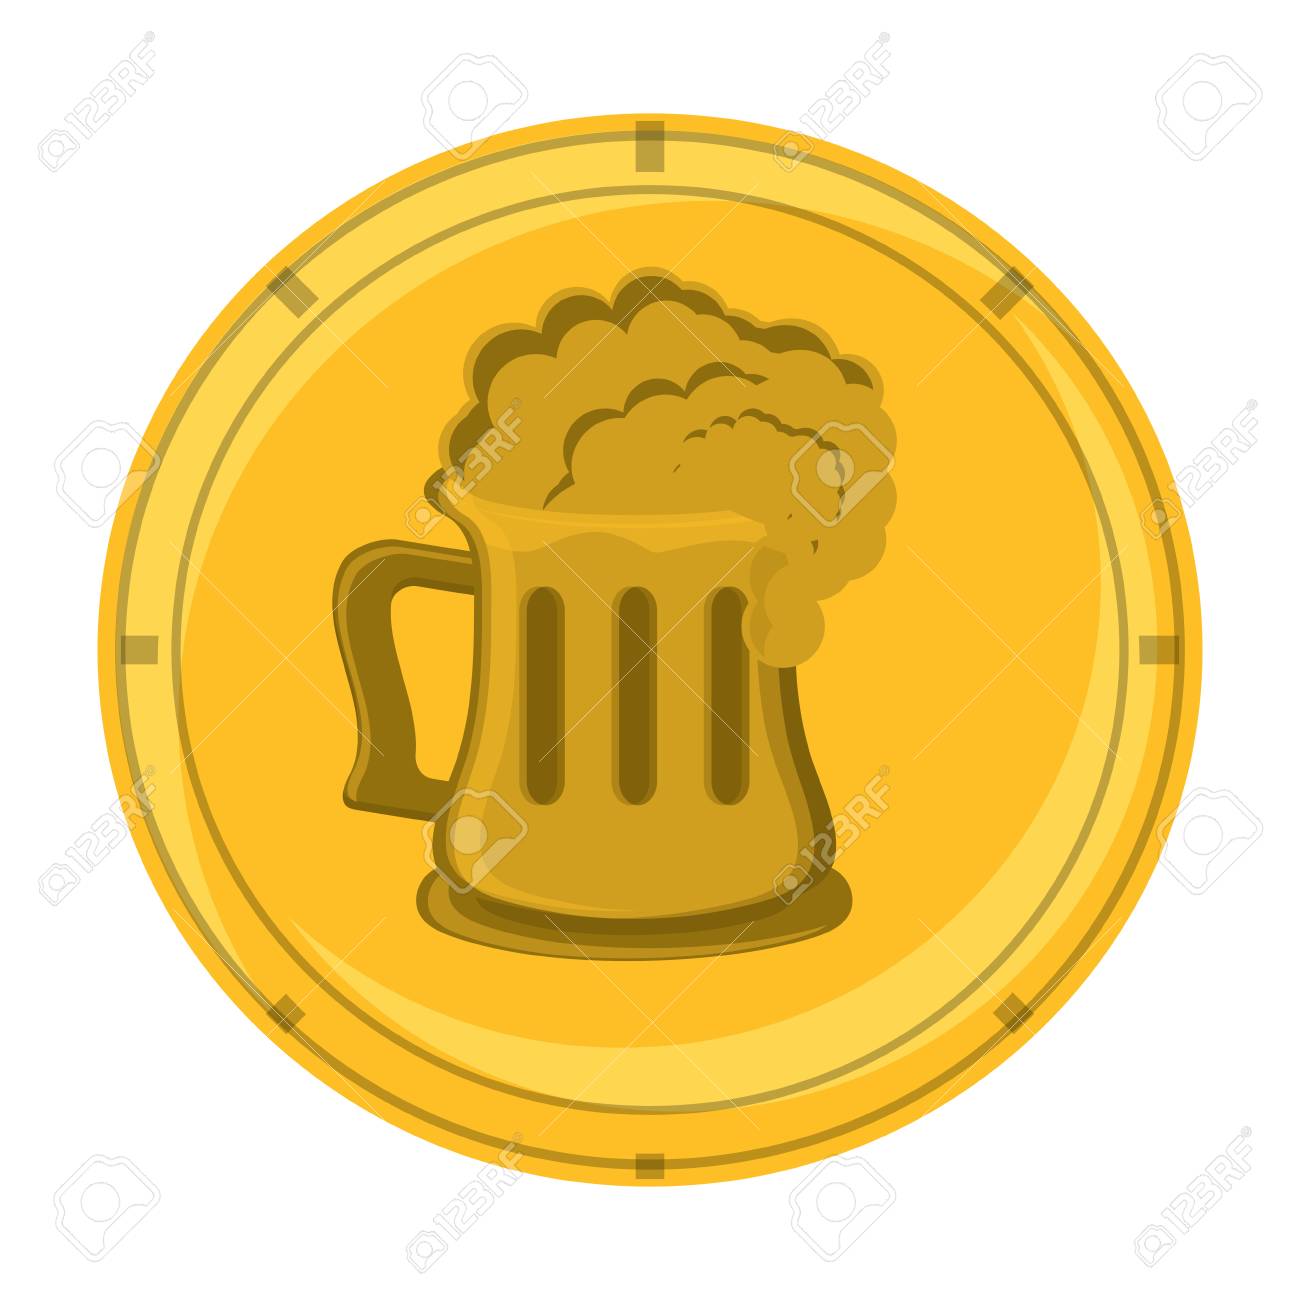 Buy Your Friend a Beer coin — Brown's Brewing Company